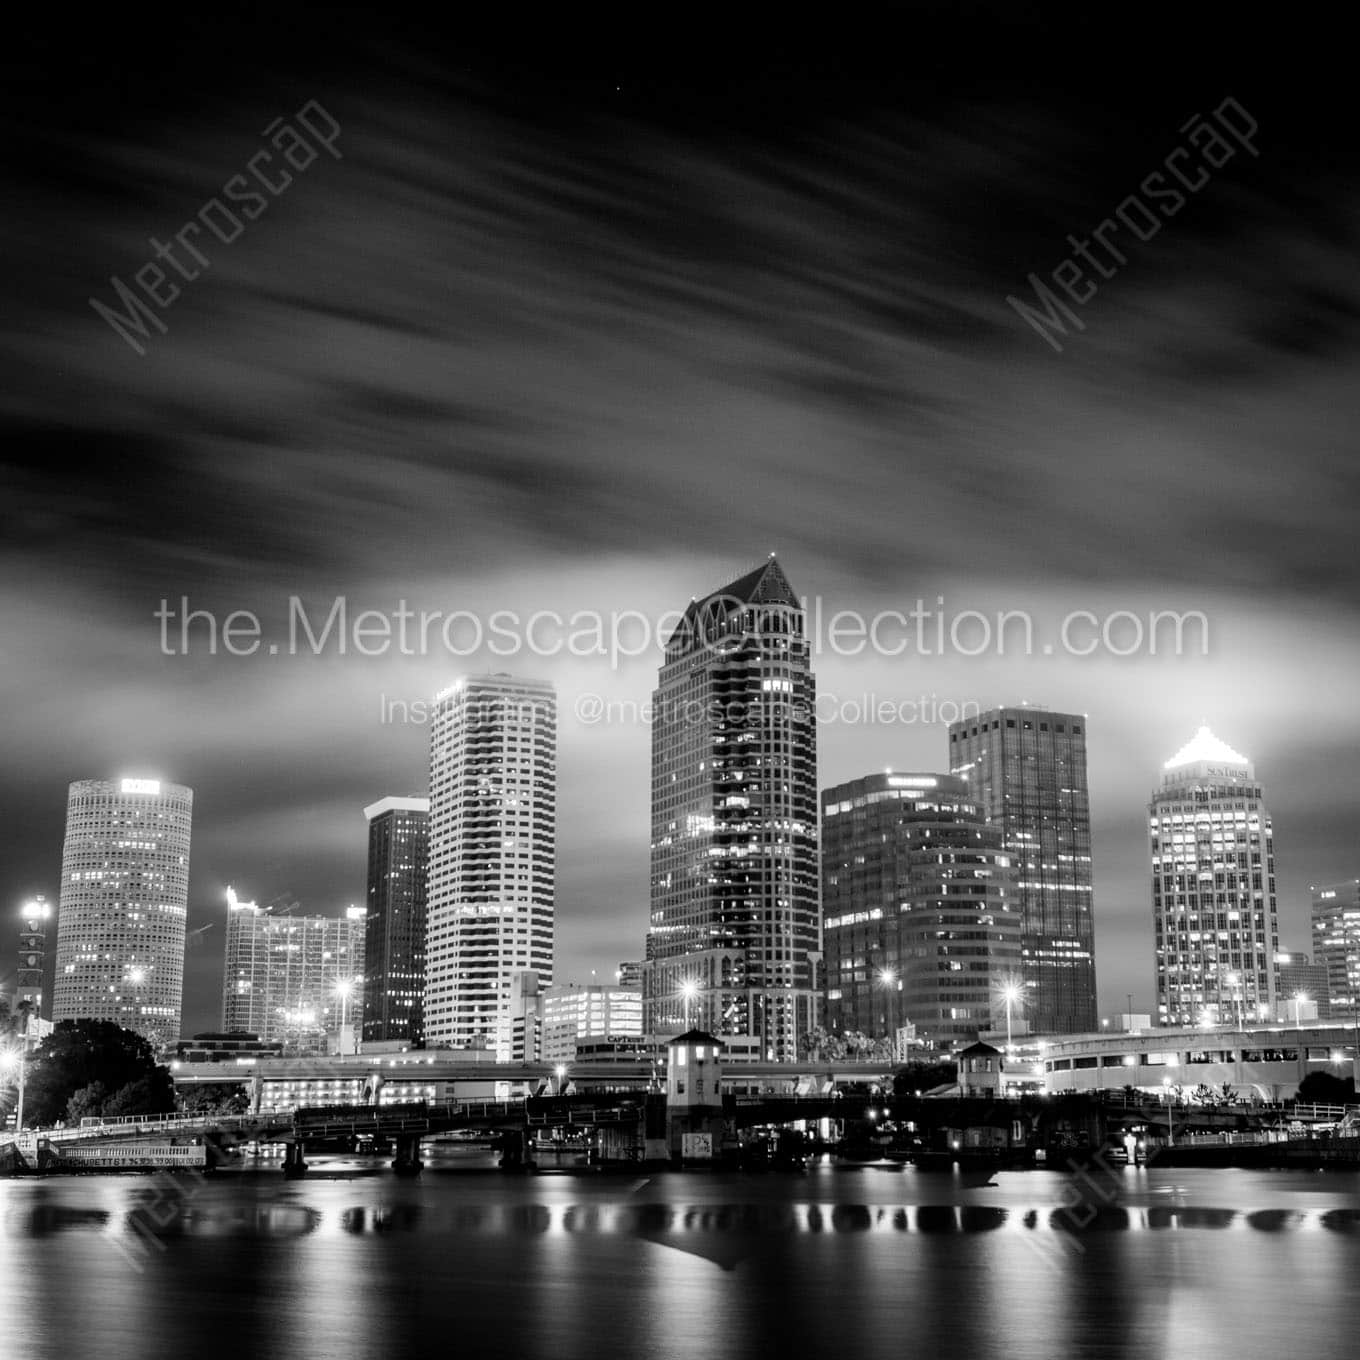 downtown tampa city skyline at night Black & White Office Art